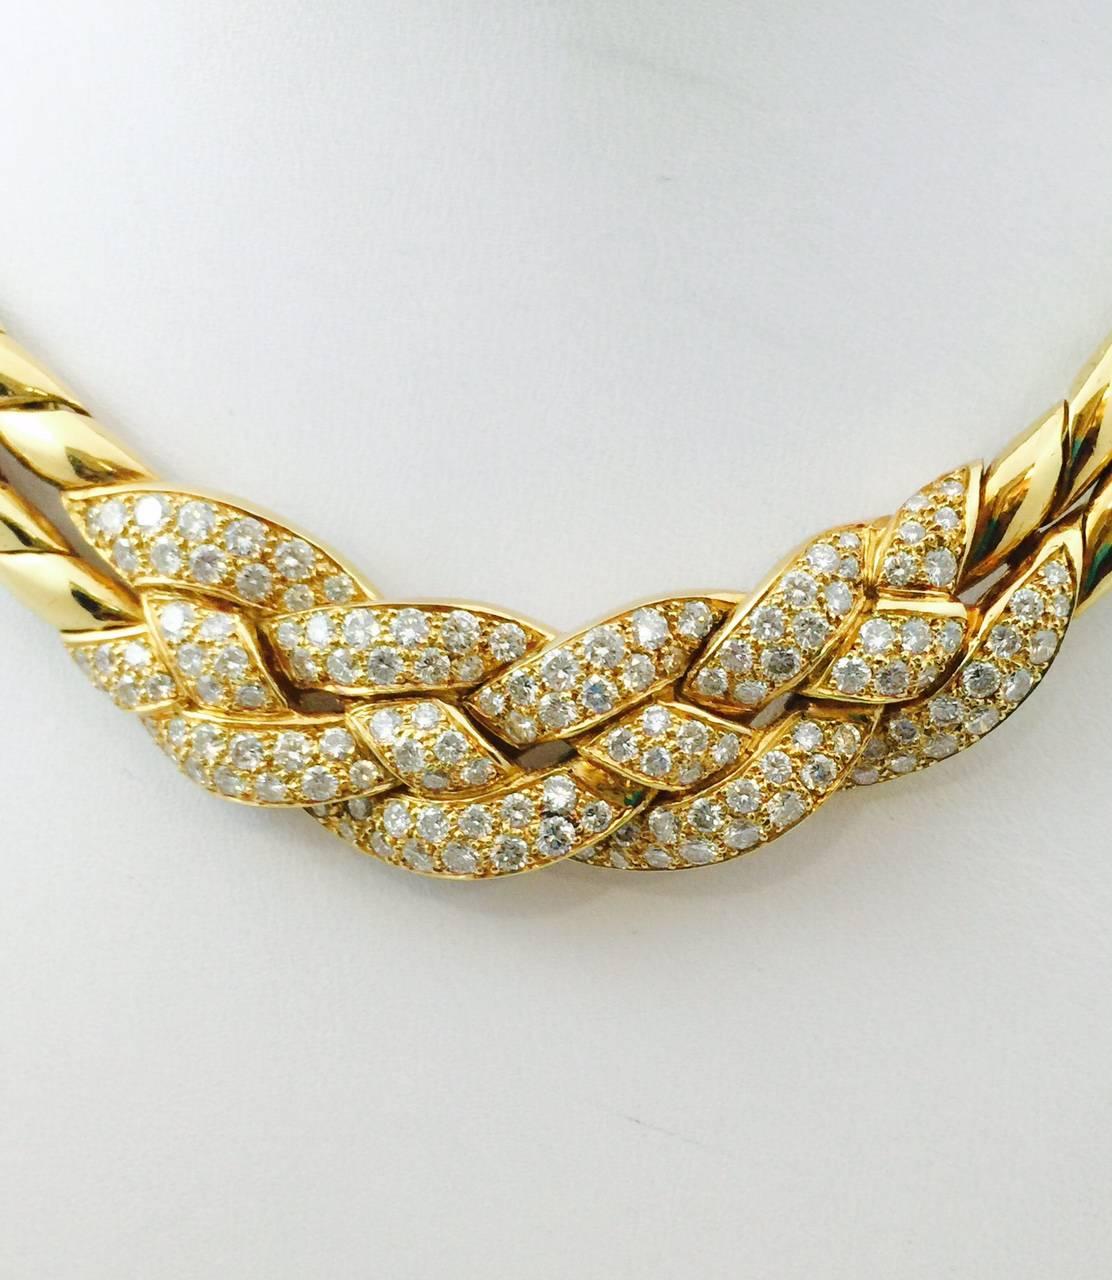 From one of the most significant names in the jewelry business, this 18 karat yellow gold choker is beyond magnificent.  A double curved link chain comes together to support diamond pave links.  These links curve and appear to be intertwined. 